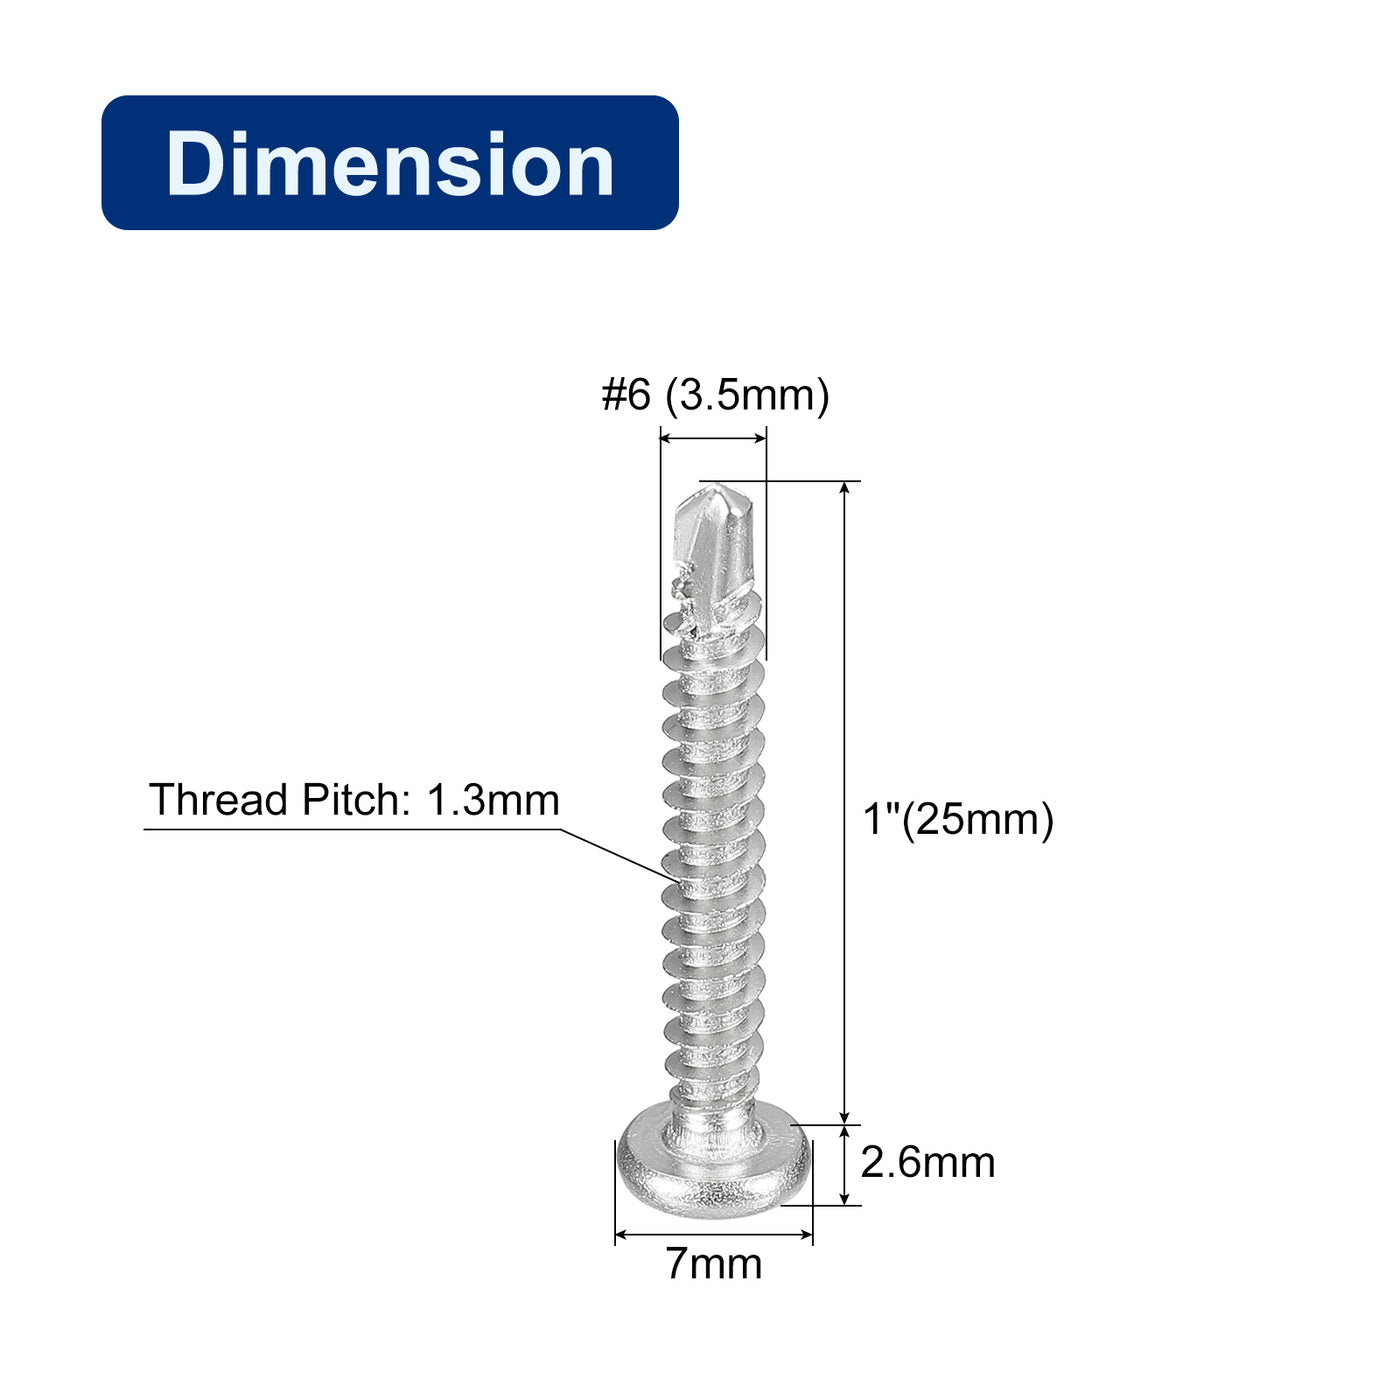 uxcell Uxcell Self Drilling Screws 304 Stainless Steel Phillips Pan Head Self Tapping Screws